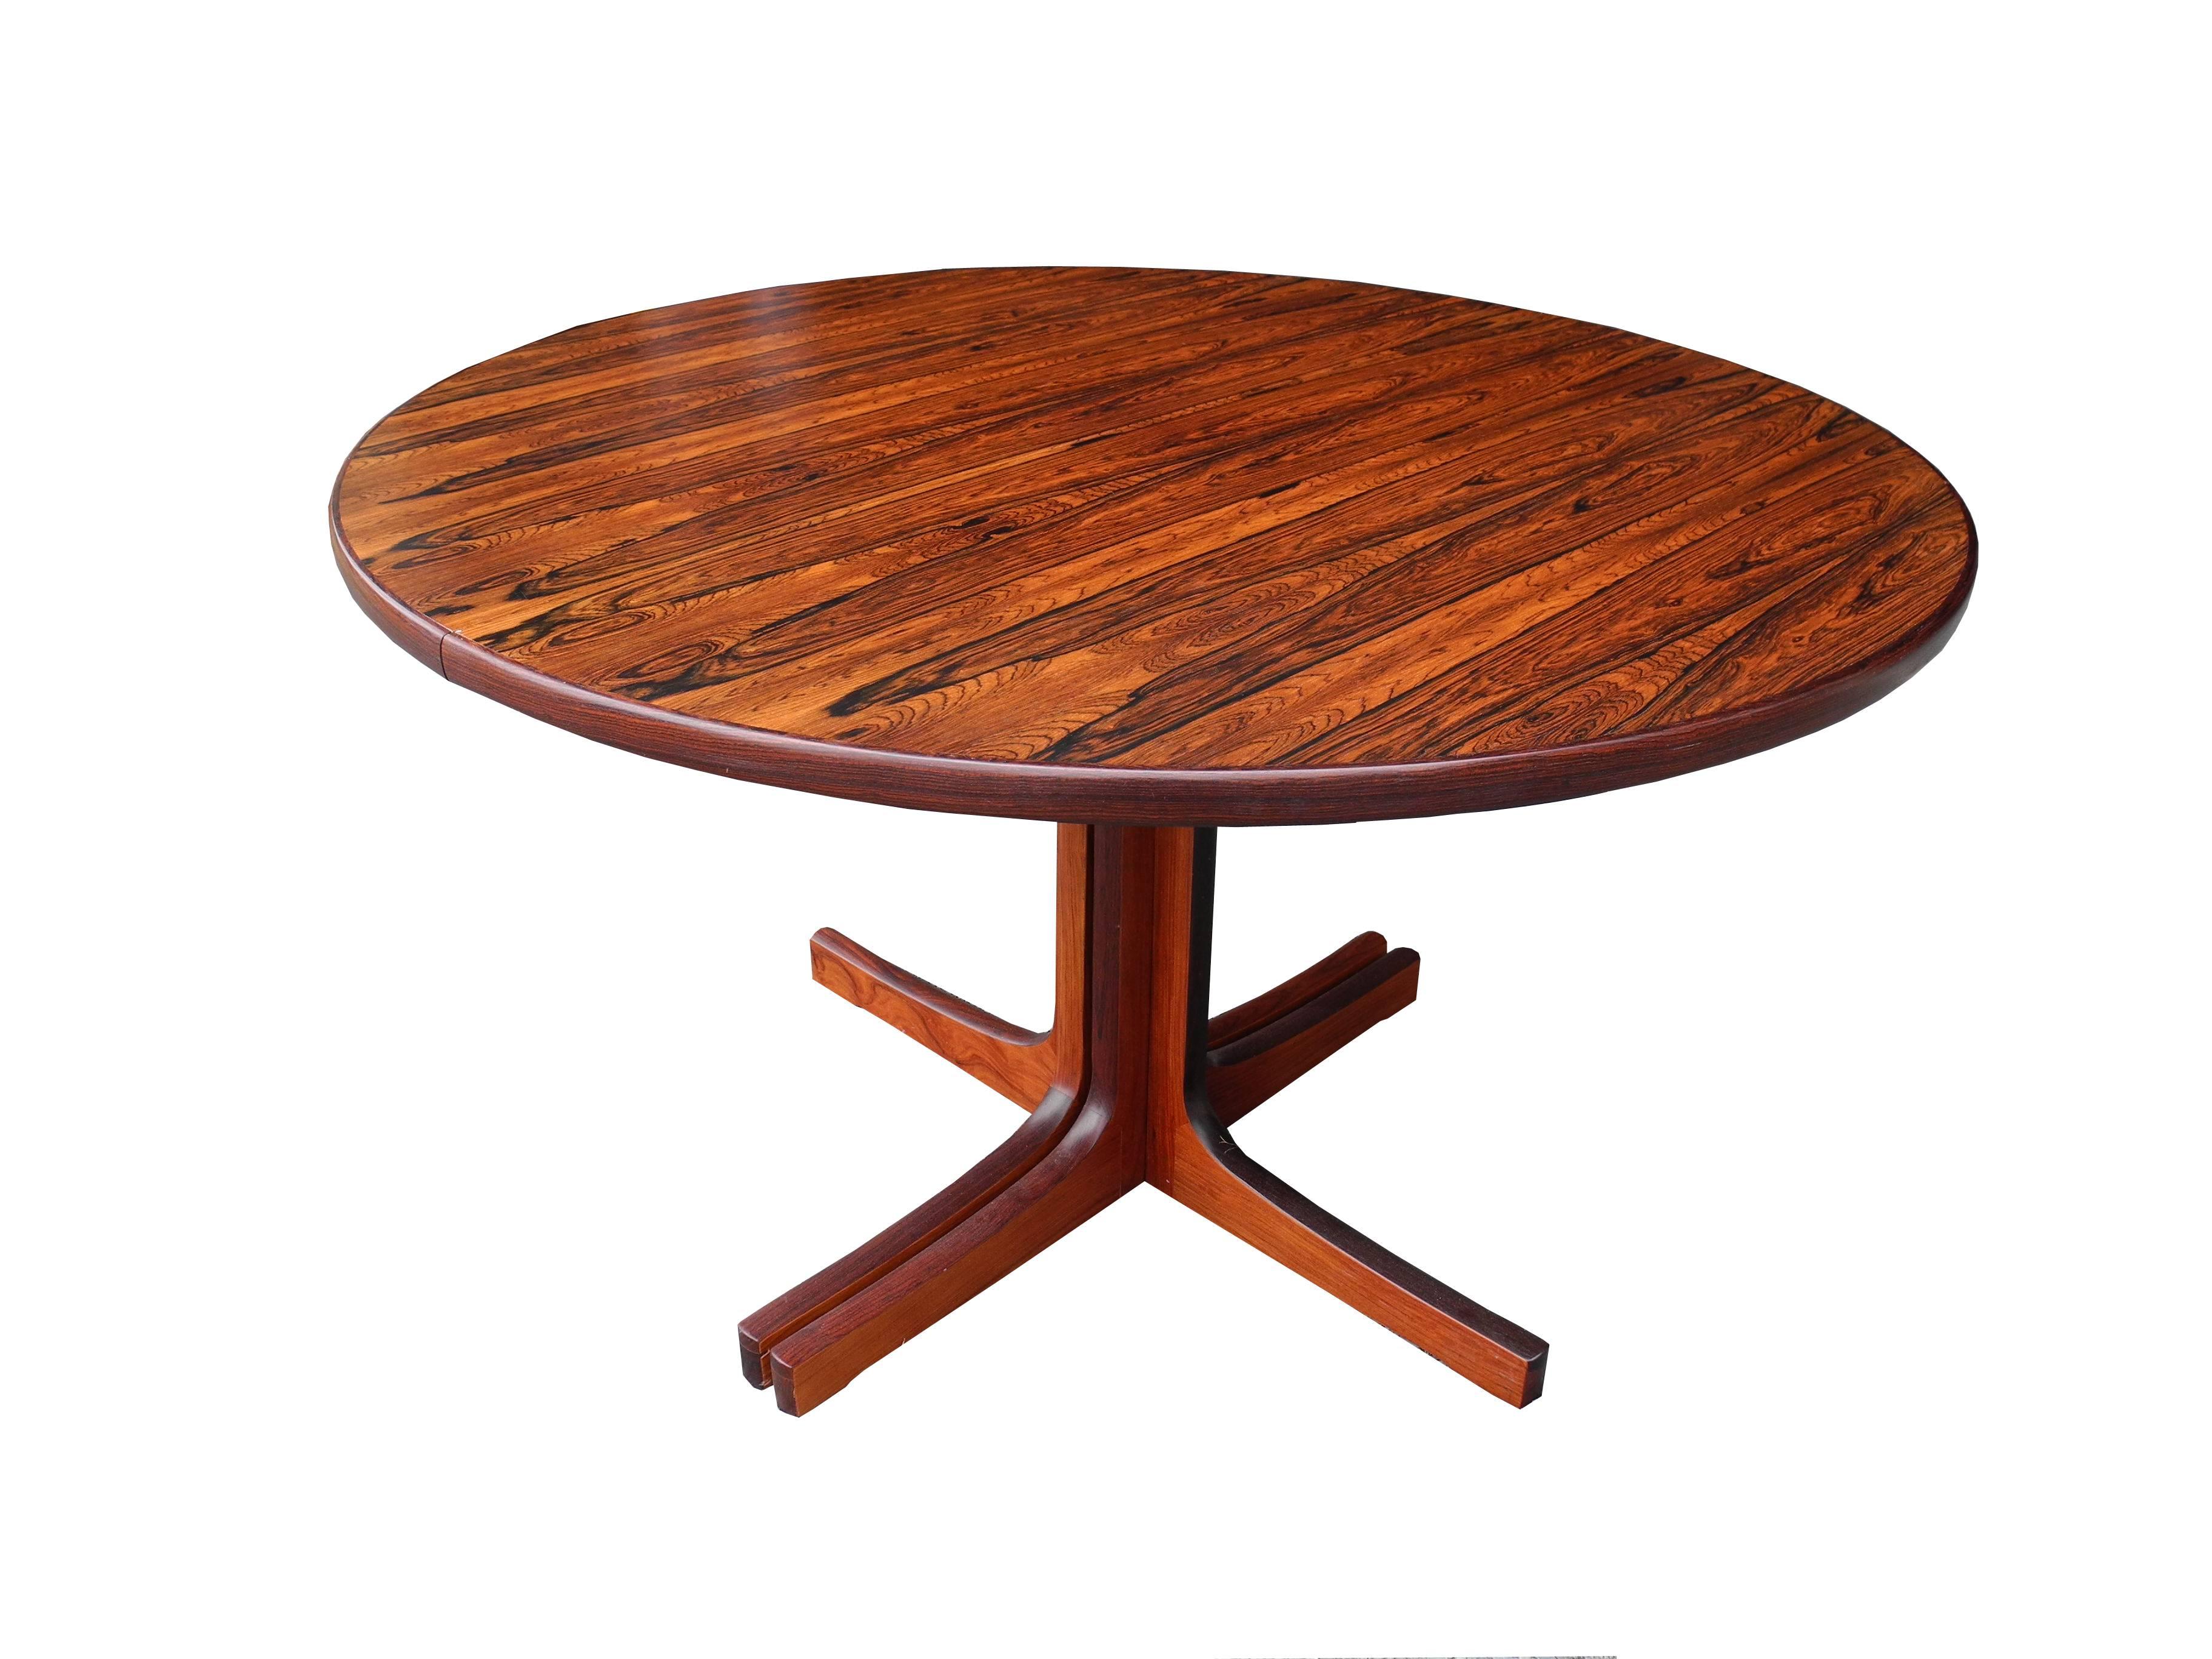 Danish Modern Round Rosewood Dining Table by Niels Otto Møller with Two Leaves 1